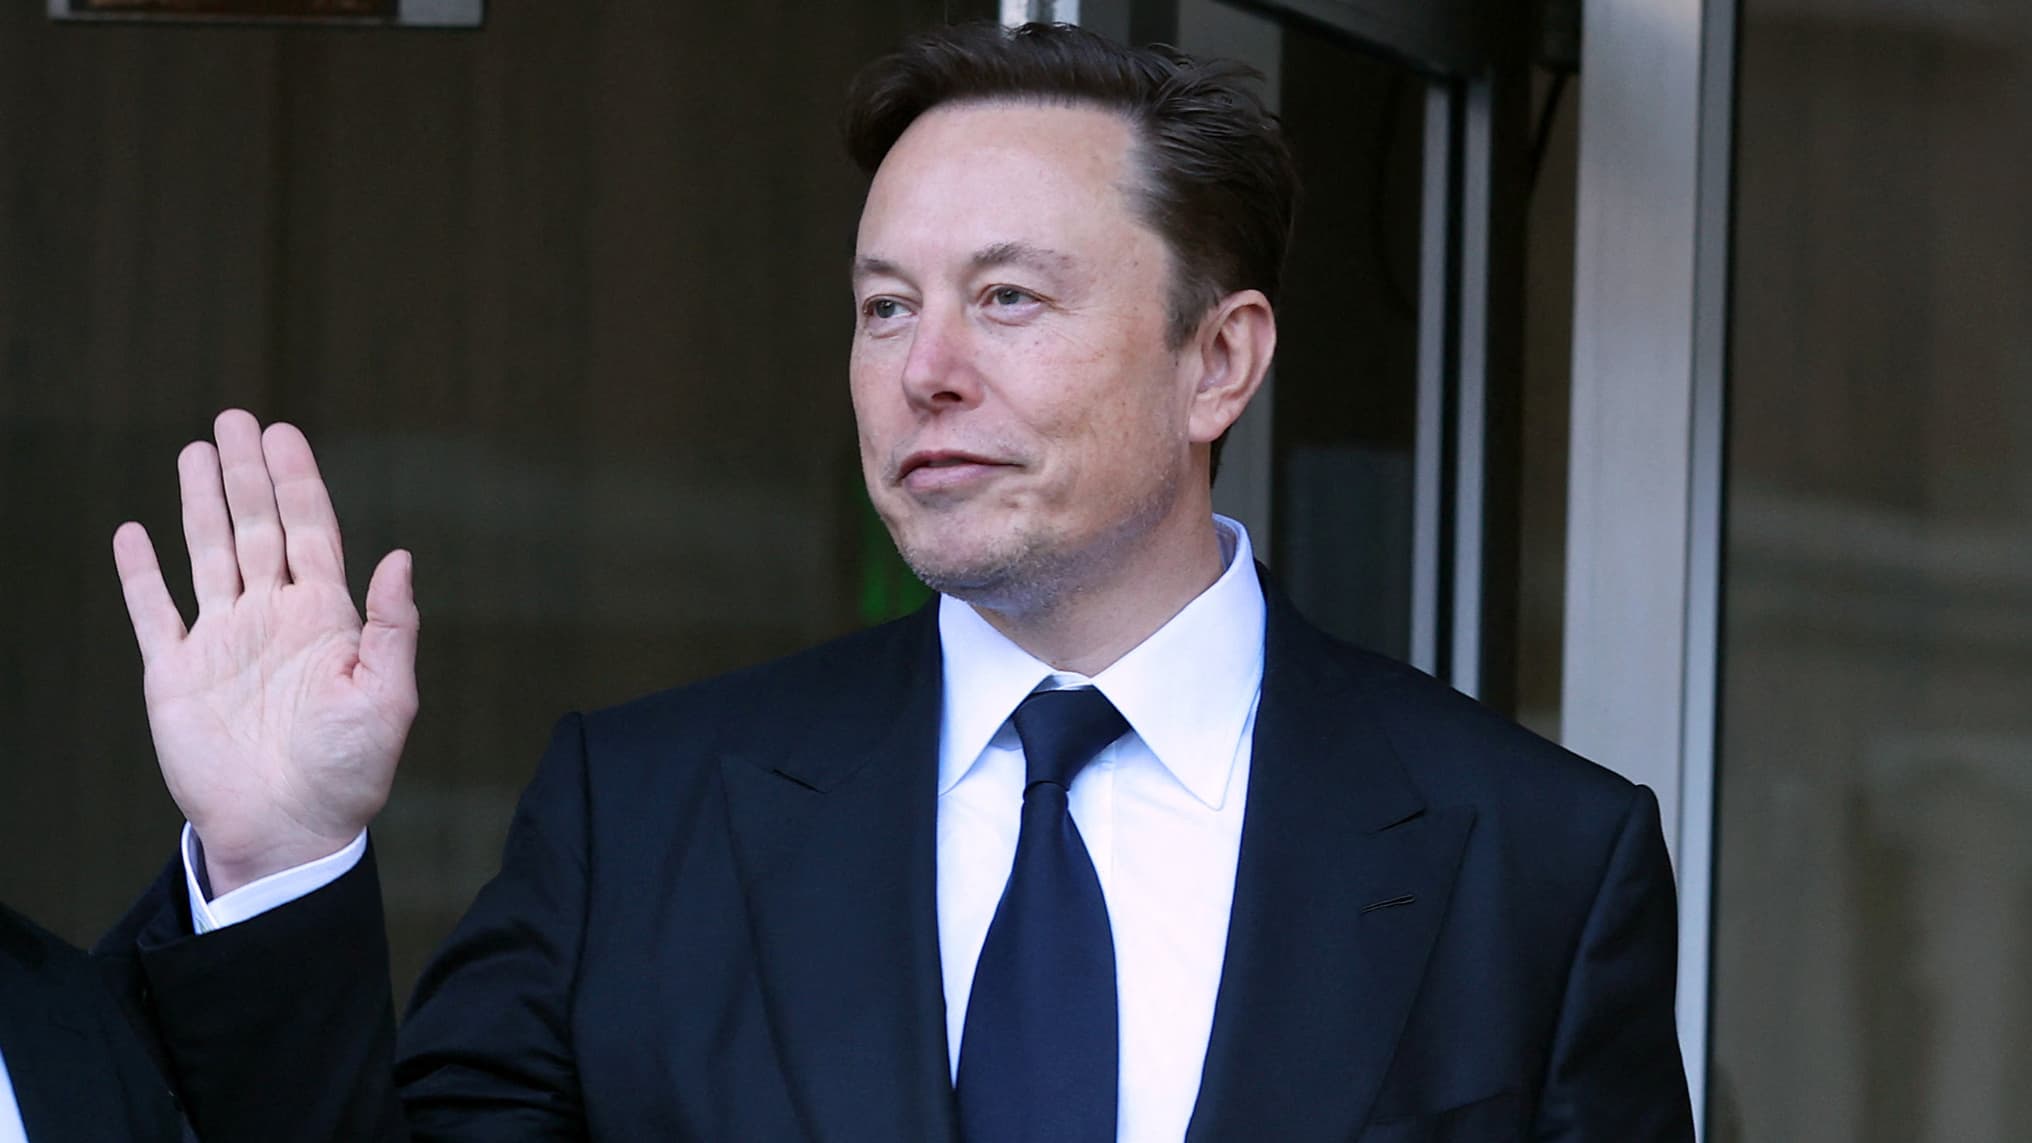 Elon Musk once again becomes the richest man in the world, ahead of Bernard Arnault